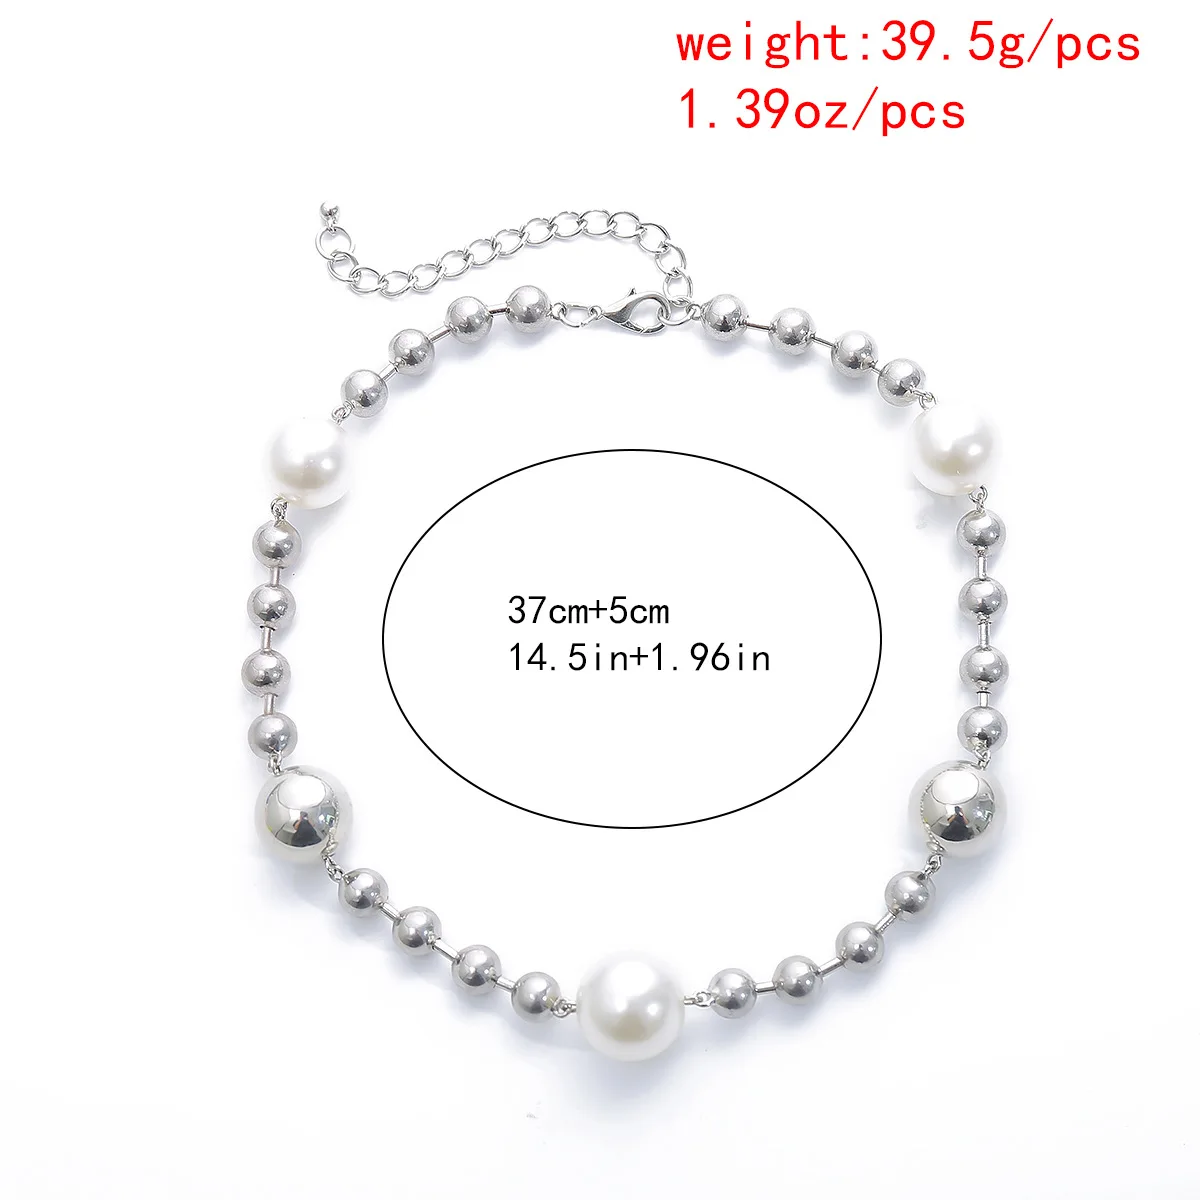 

Hip hop Fine Metal Round Beaded Imitation Pearl Collares Chokers For Women Fashion Punk Chain Neck Jewelry Statement Necklaces